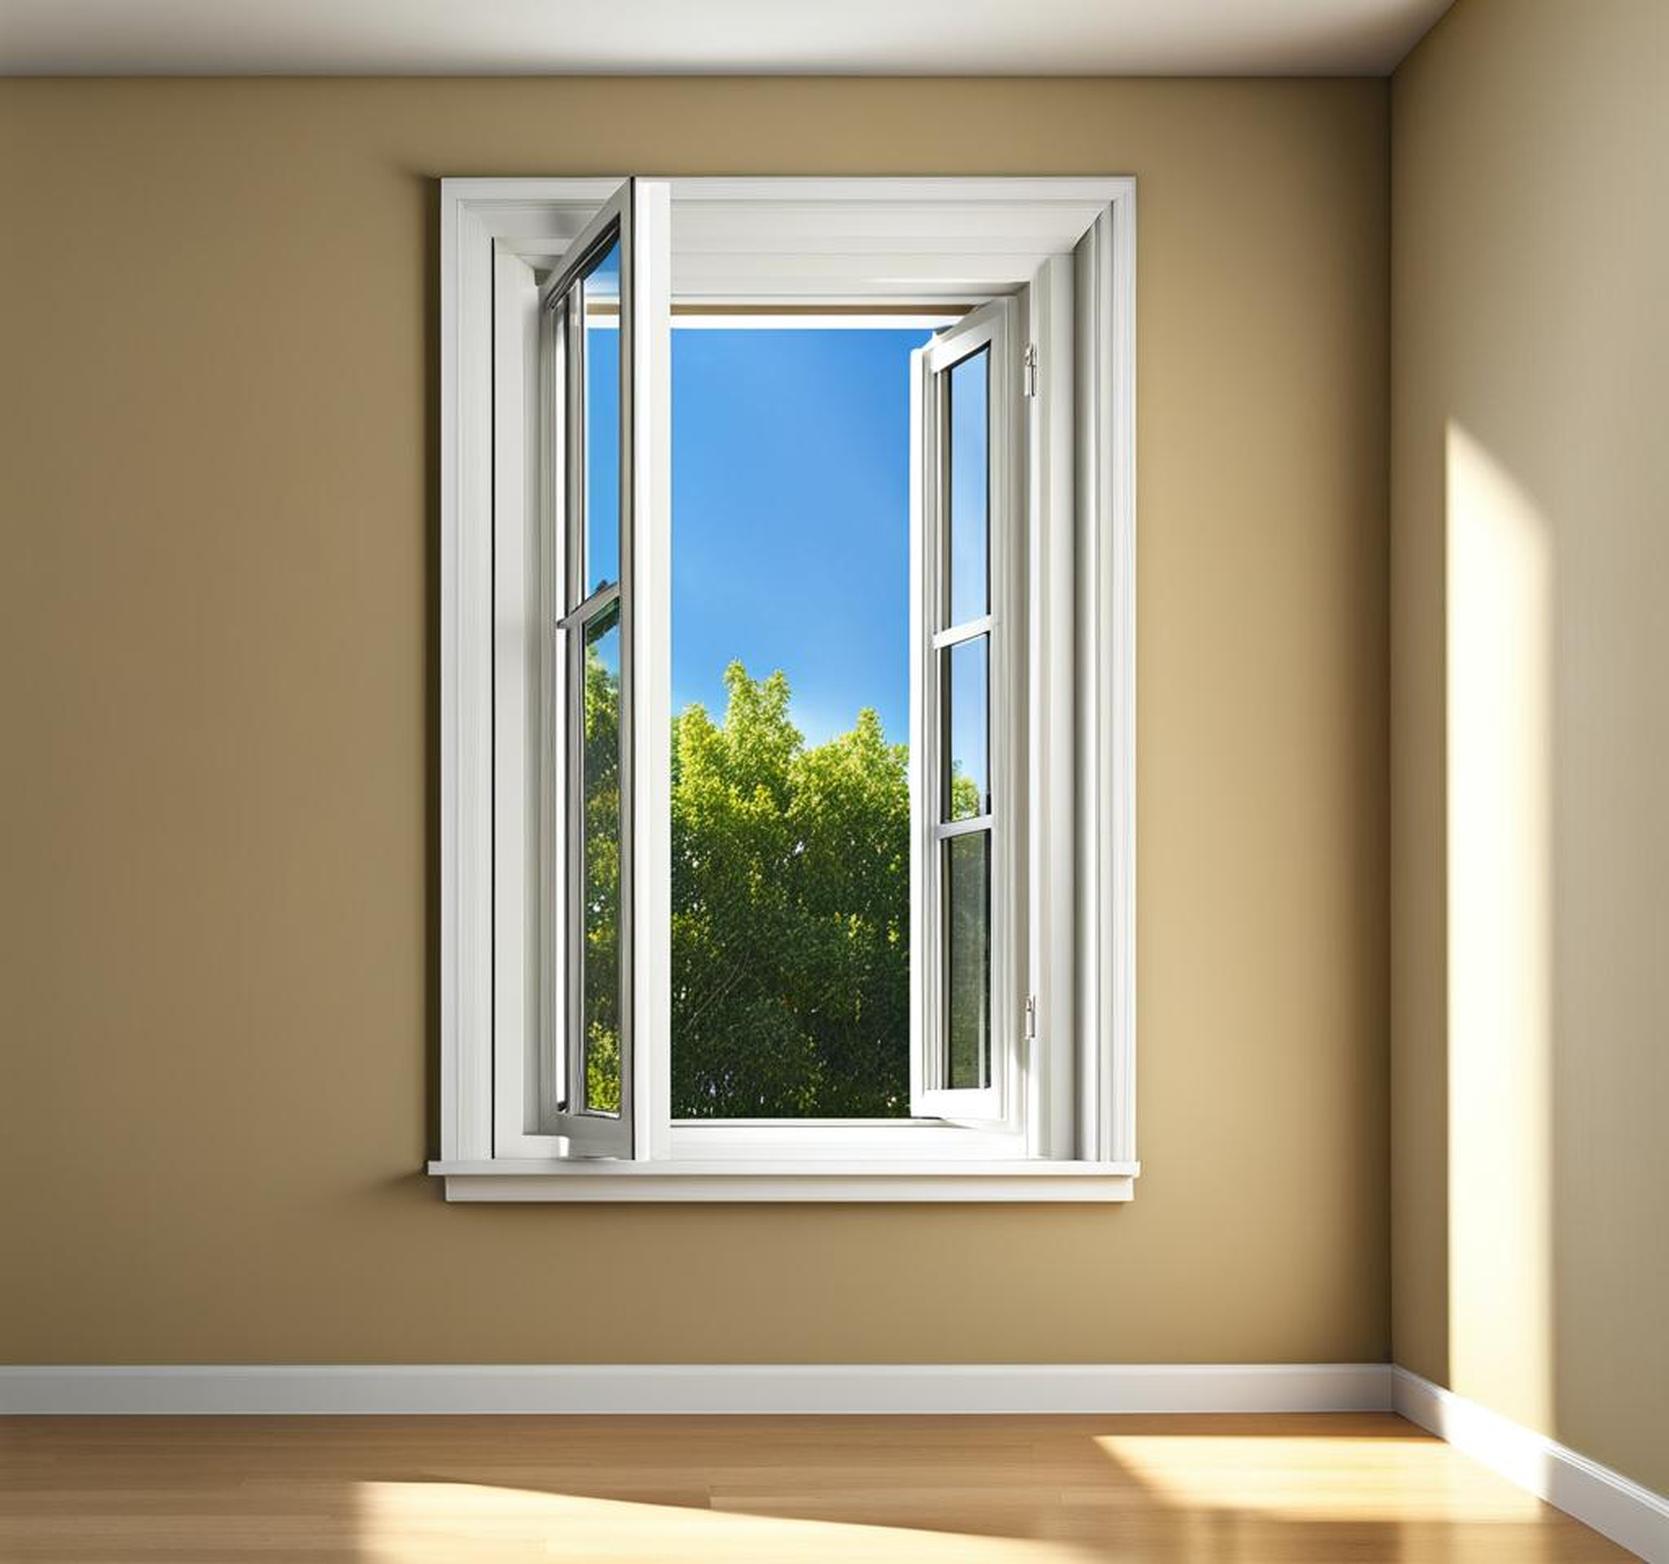 Minimum Bedroom Window Size: Safety Rules and Legal Codes